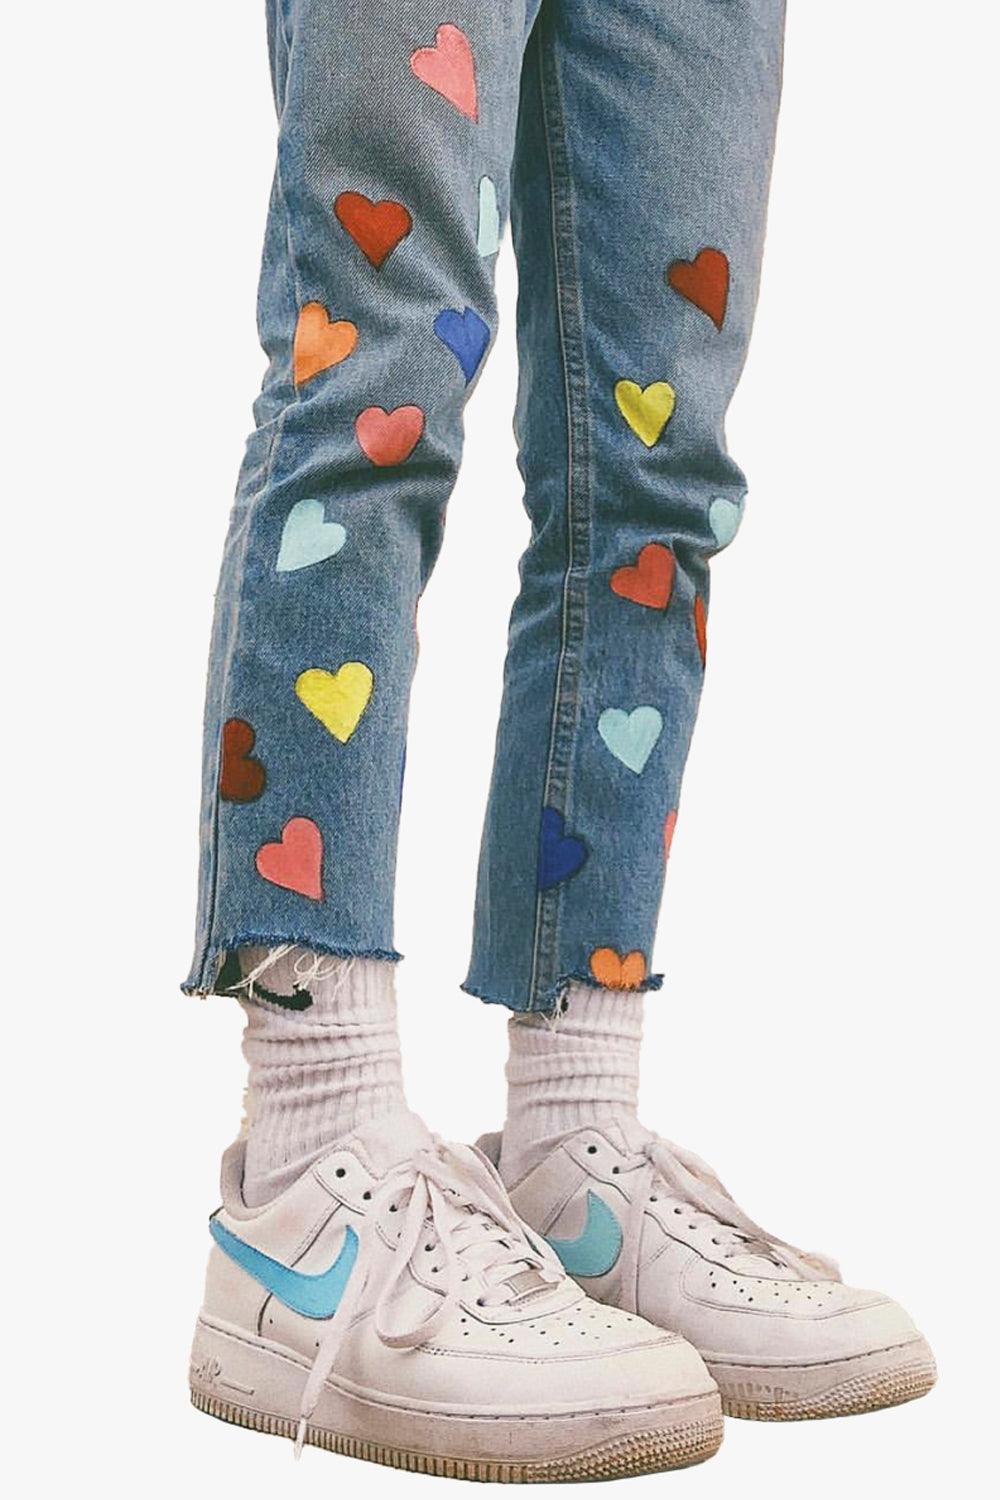 Colored Hearts Kidcore Aesthetic Jeans - Aesthetic Clothes Shop